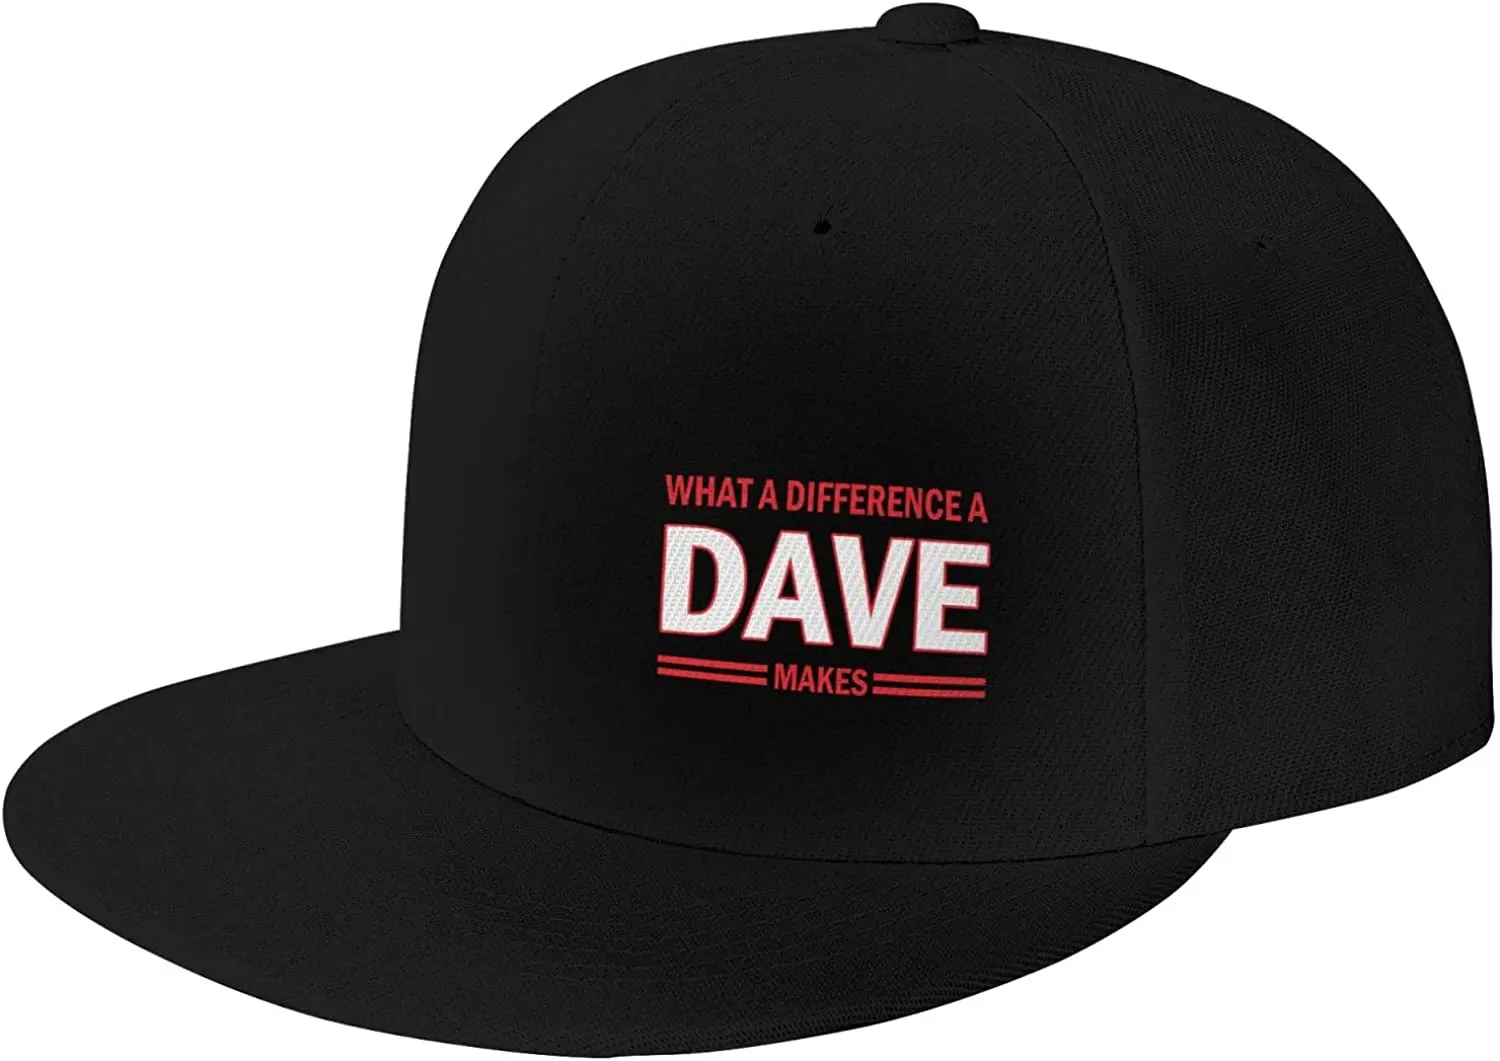 

Snapback Hats for Men Women Flat Bill Brim What A Difference A Dave Makes Hat Funny Saying David Hat Adjustable Baseball Cap